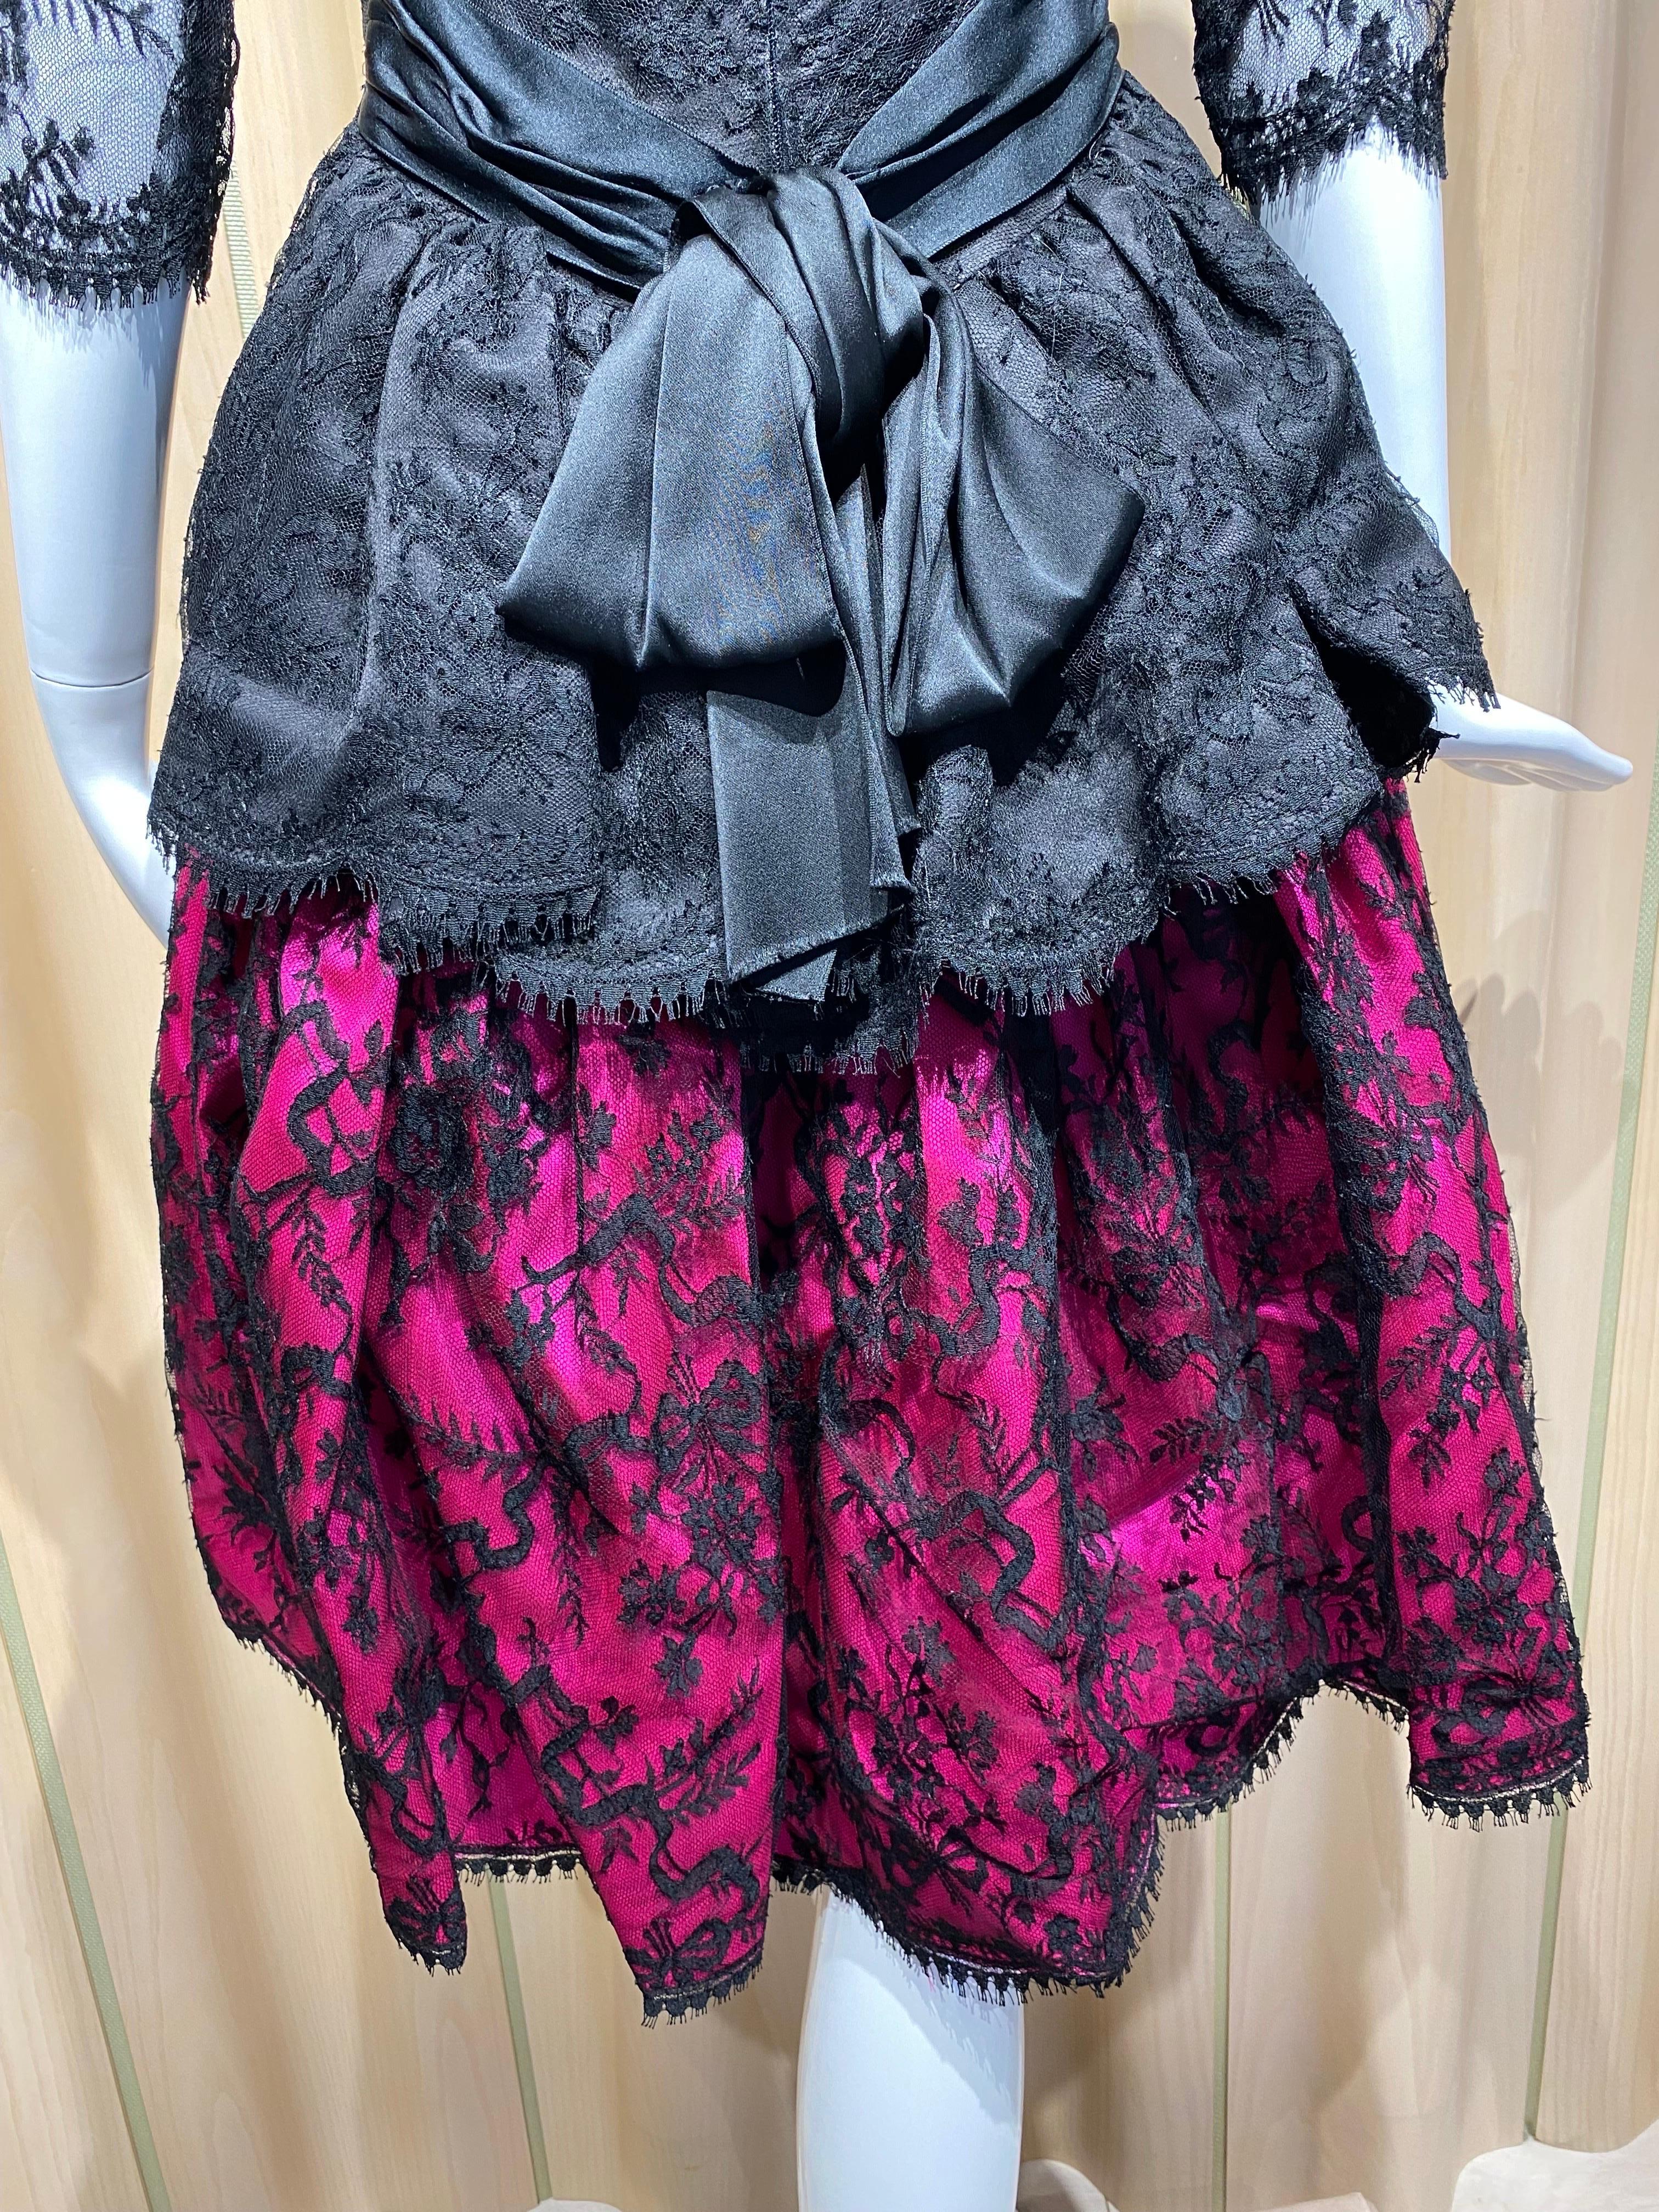 Vintage Bill Blass Black Lace and Hot Pink Cocktail Dress For Sale 2